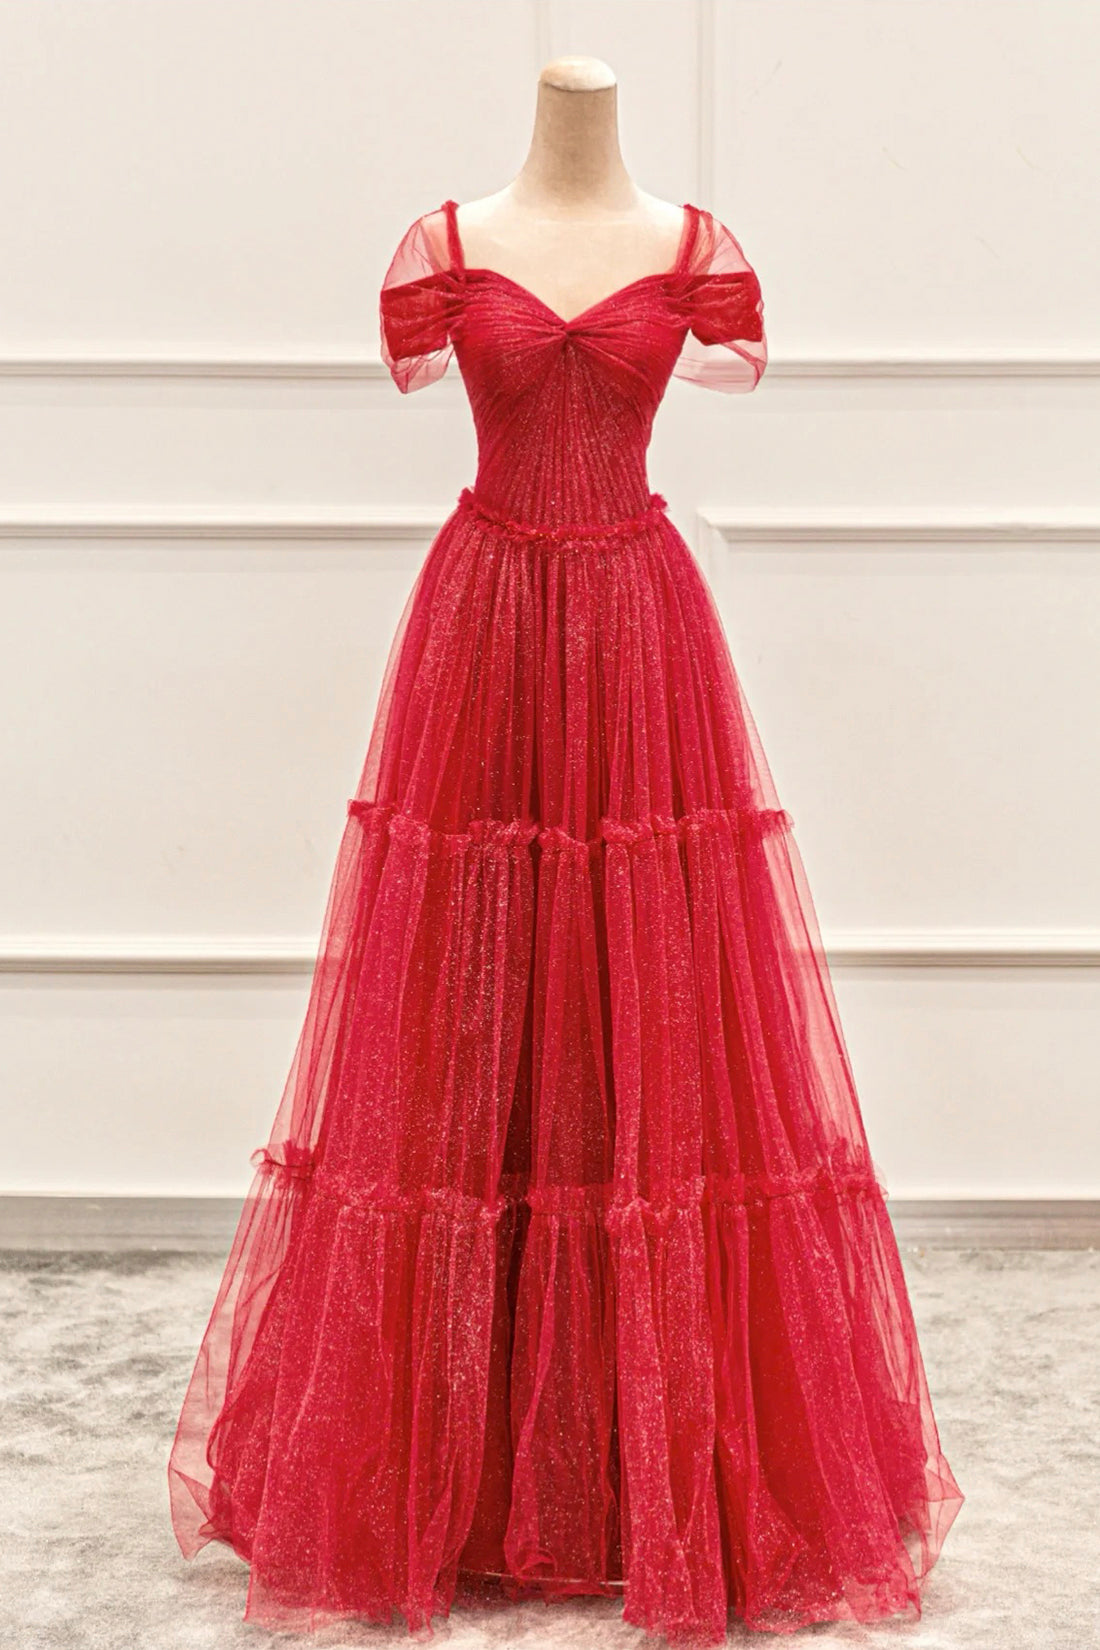 Red Tulle Long A-Line Prom Dress, Off the Shoulder Evening Party Dress with Lace Up